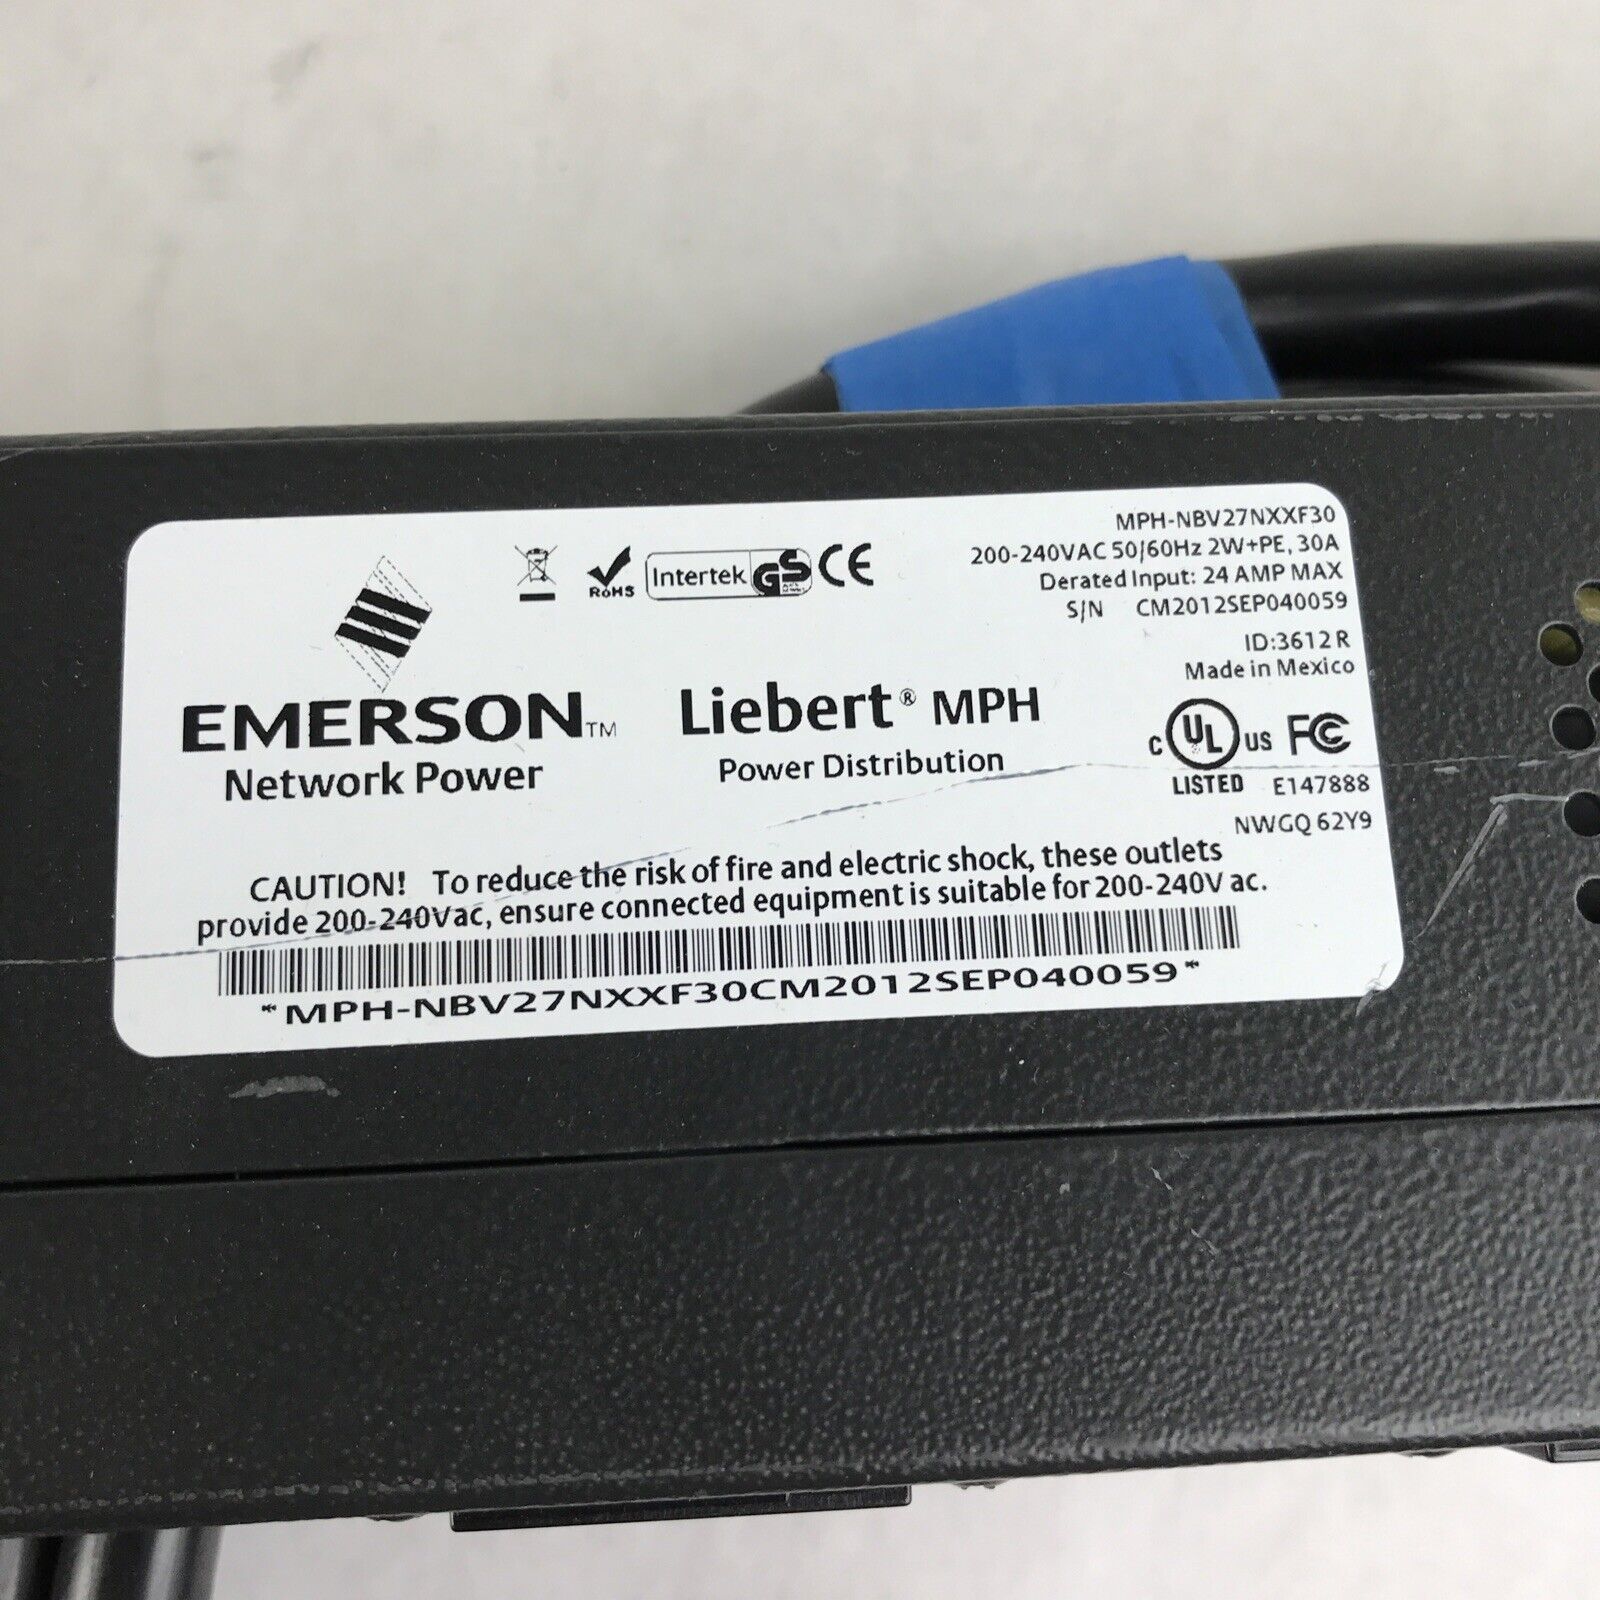 Emerson MPH-NBV27NXXF30 Liebert MPH Power Distribution (Tested and Working)